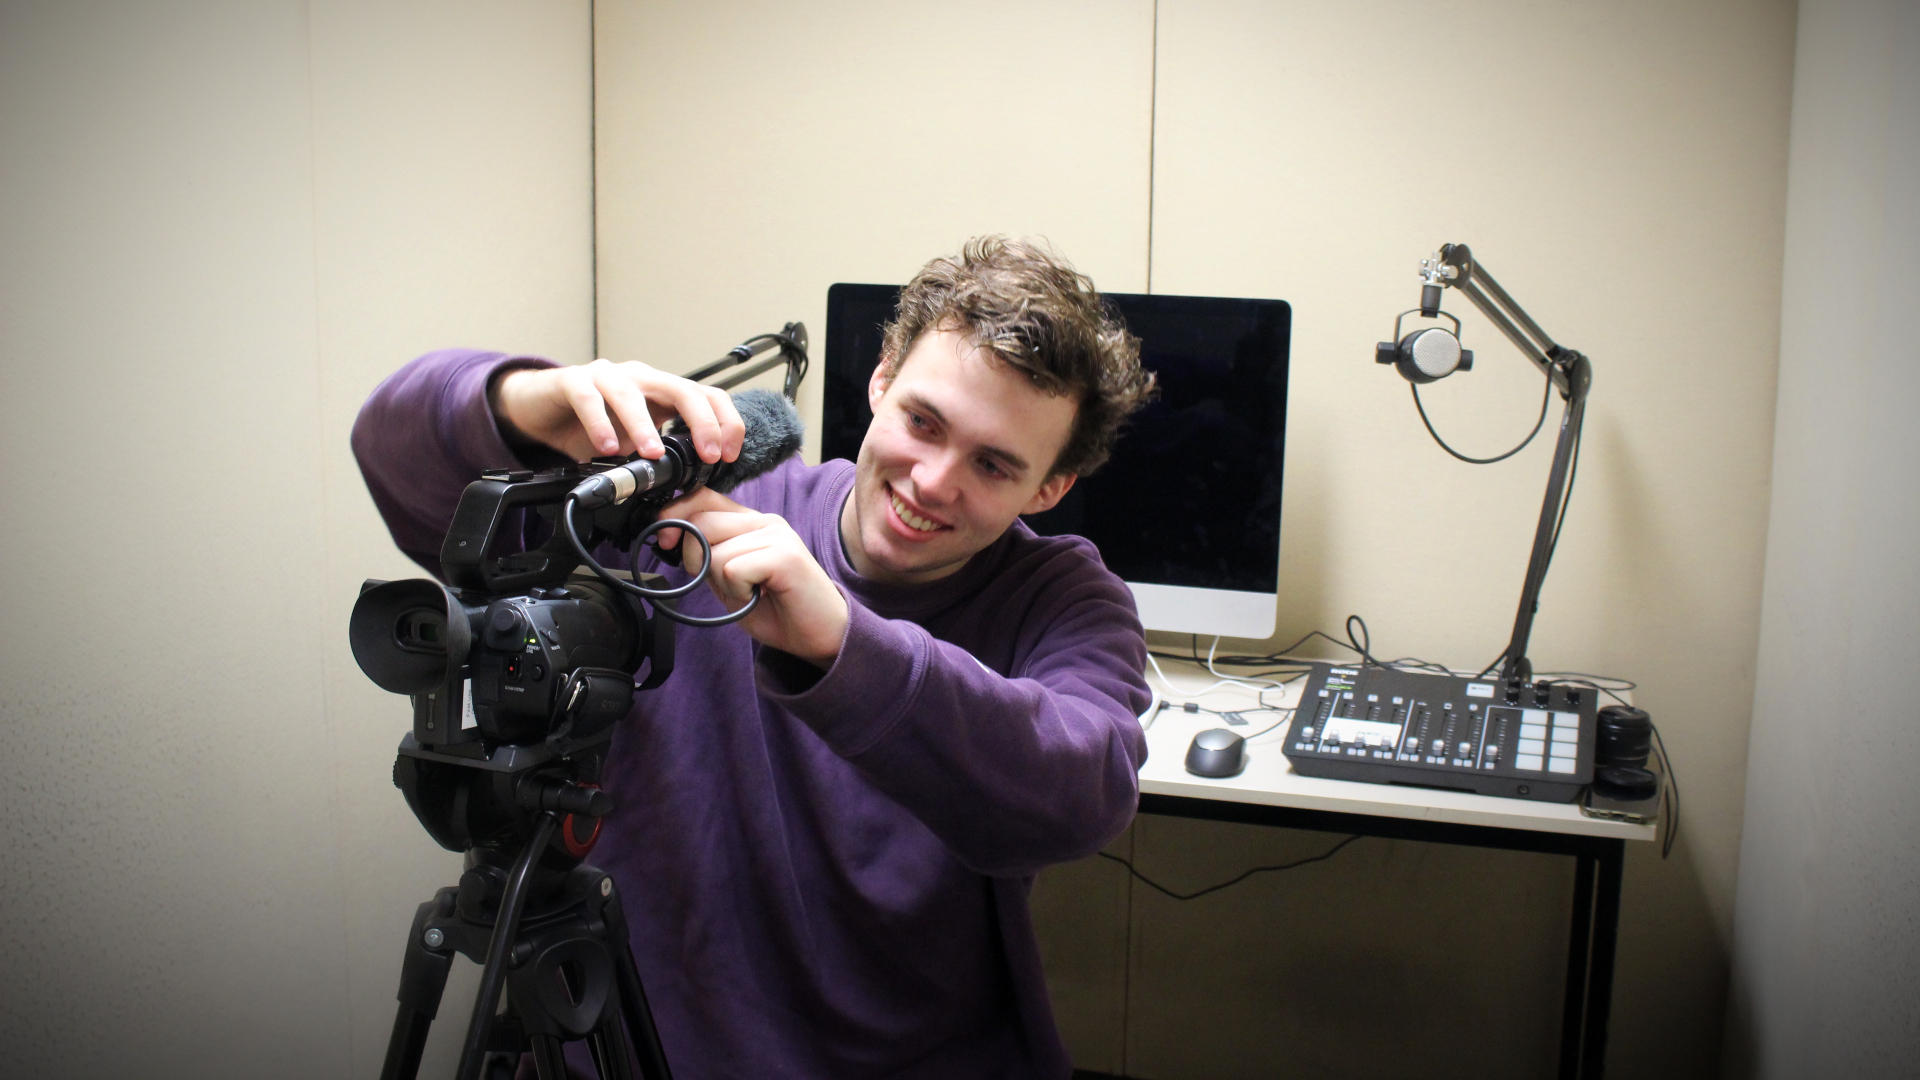 A male student setting up a camera and a microphone in a studio